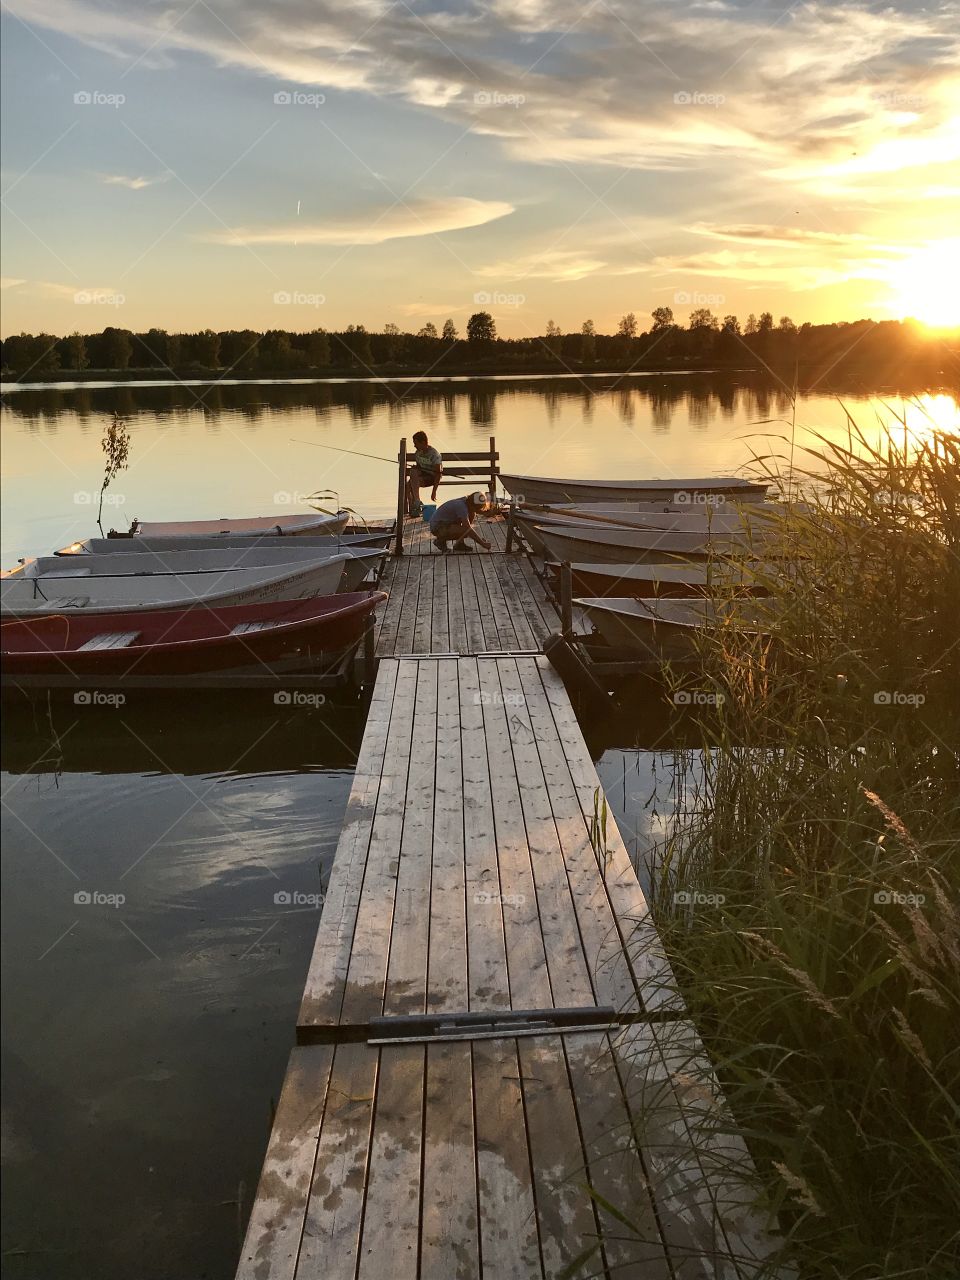 Wooden jetty with row boats on the side of a calm lake at dusk